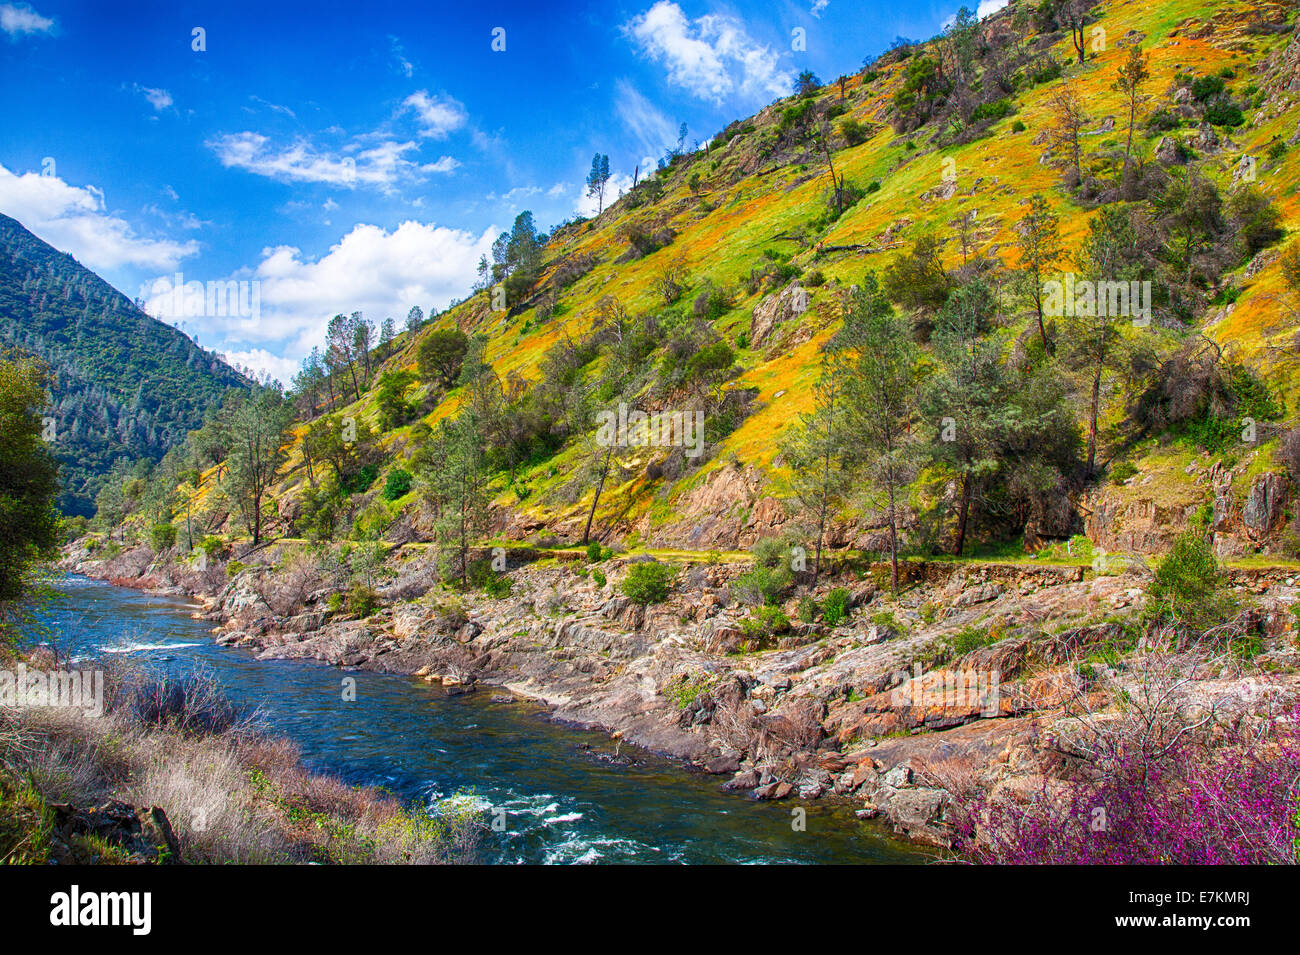 California Poppies cover the hillsides and cliffs of the Merced River Canyon in Spring. California, USA Stock Photo